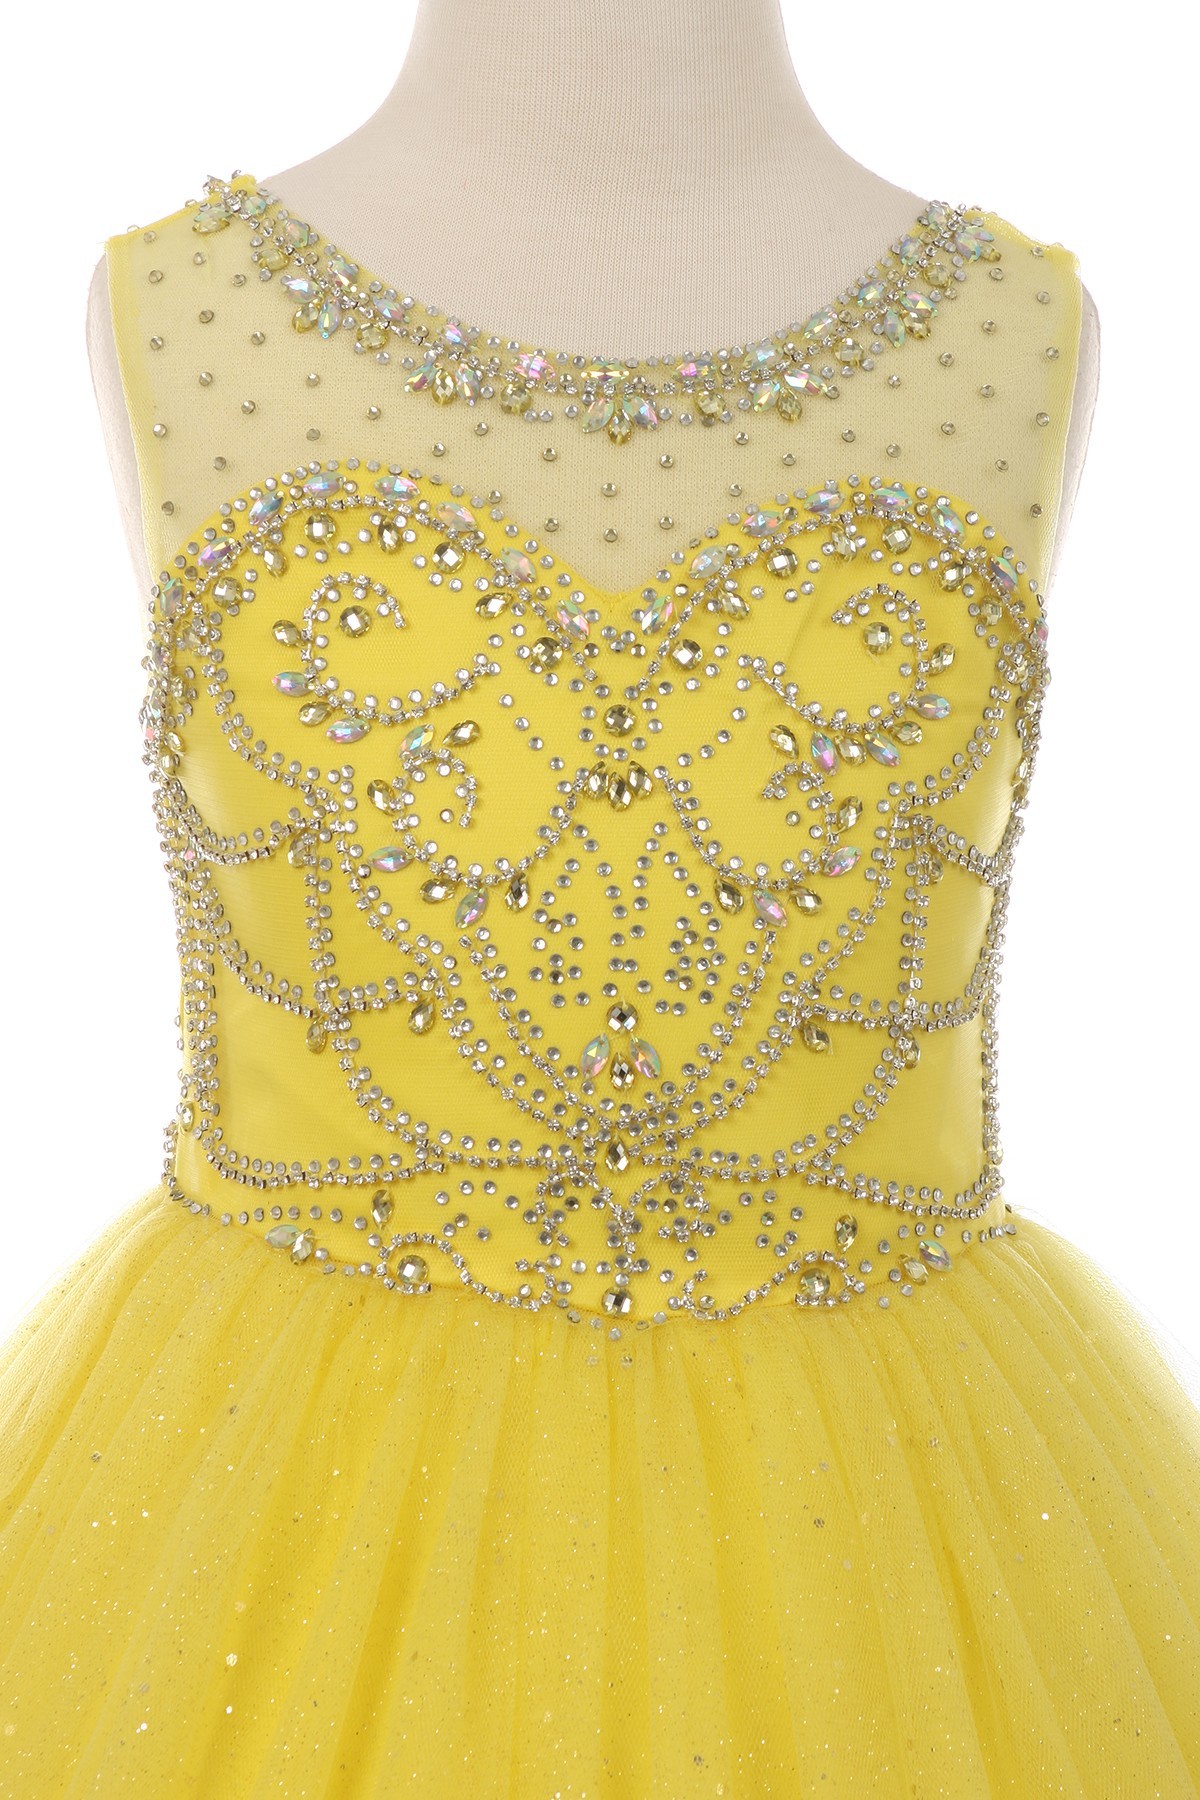 illusion neckline bodice is adorned with AB tone crystal beading